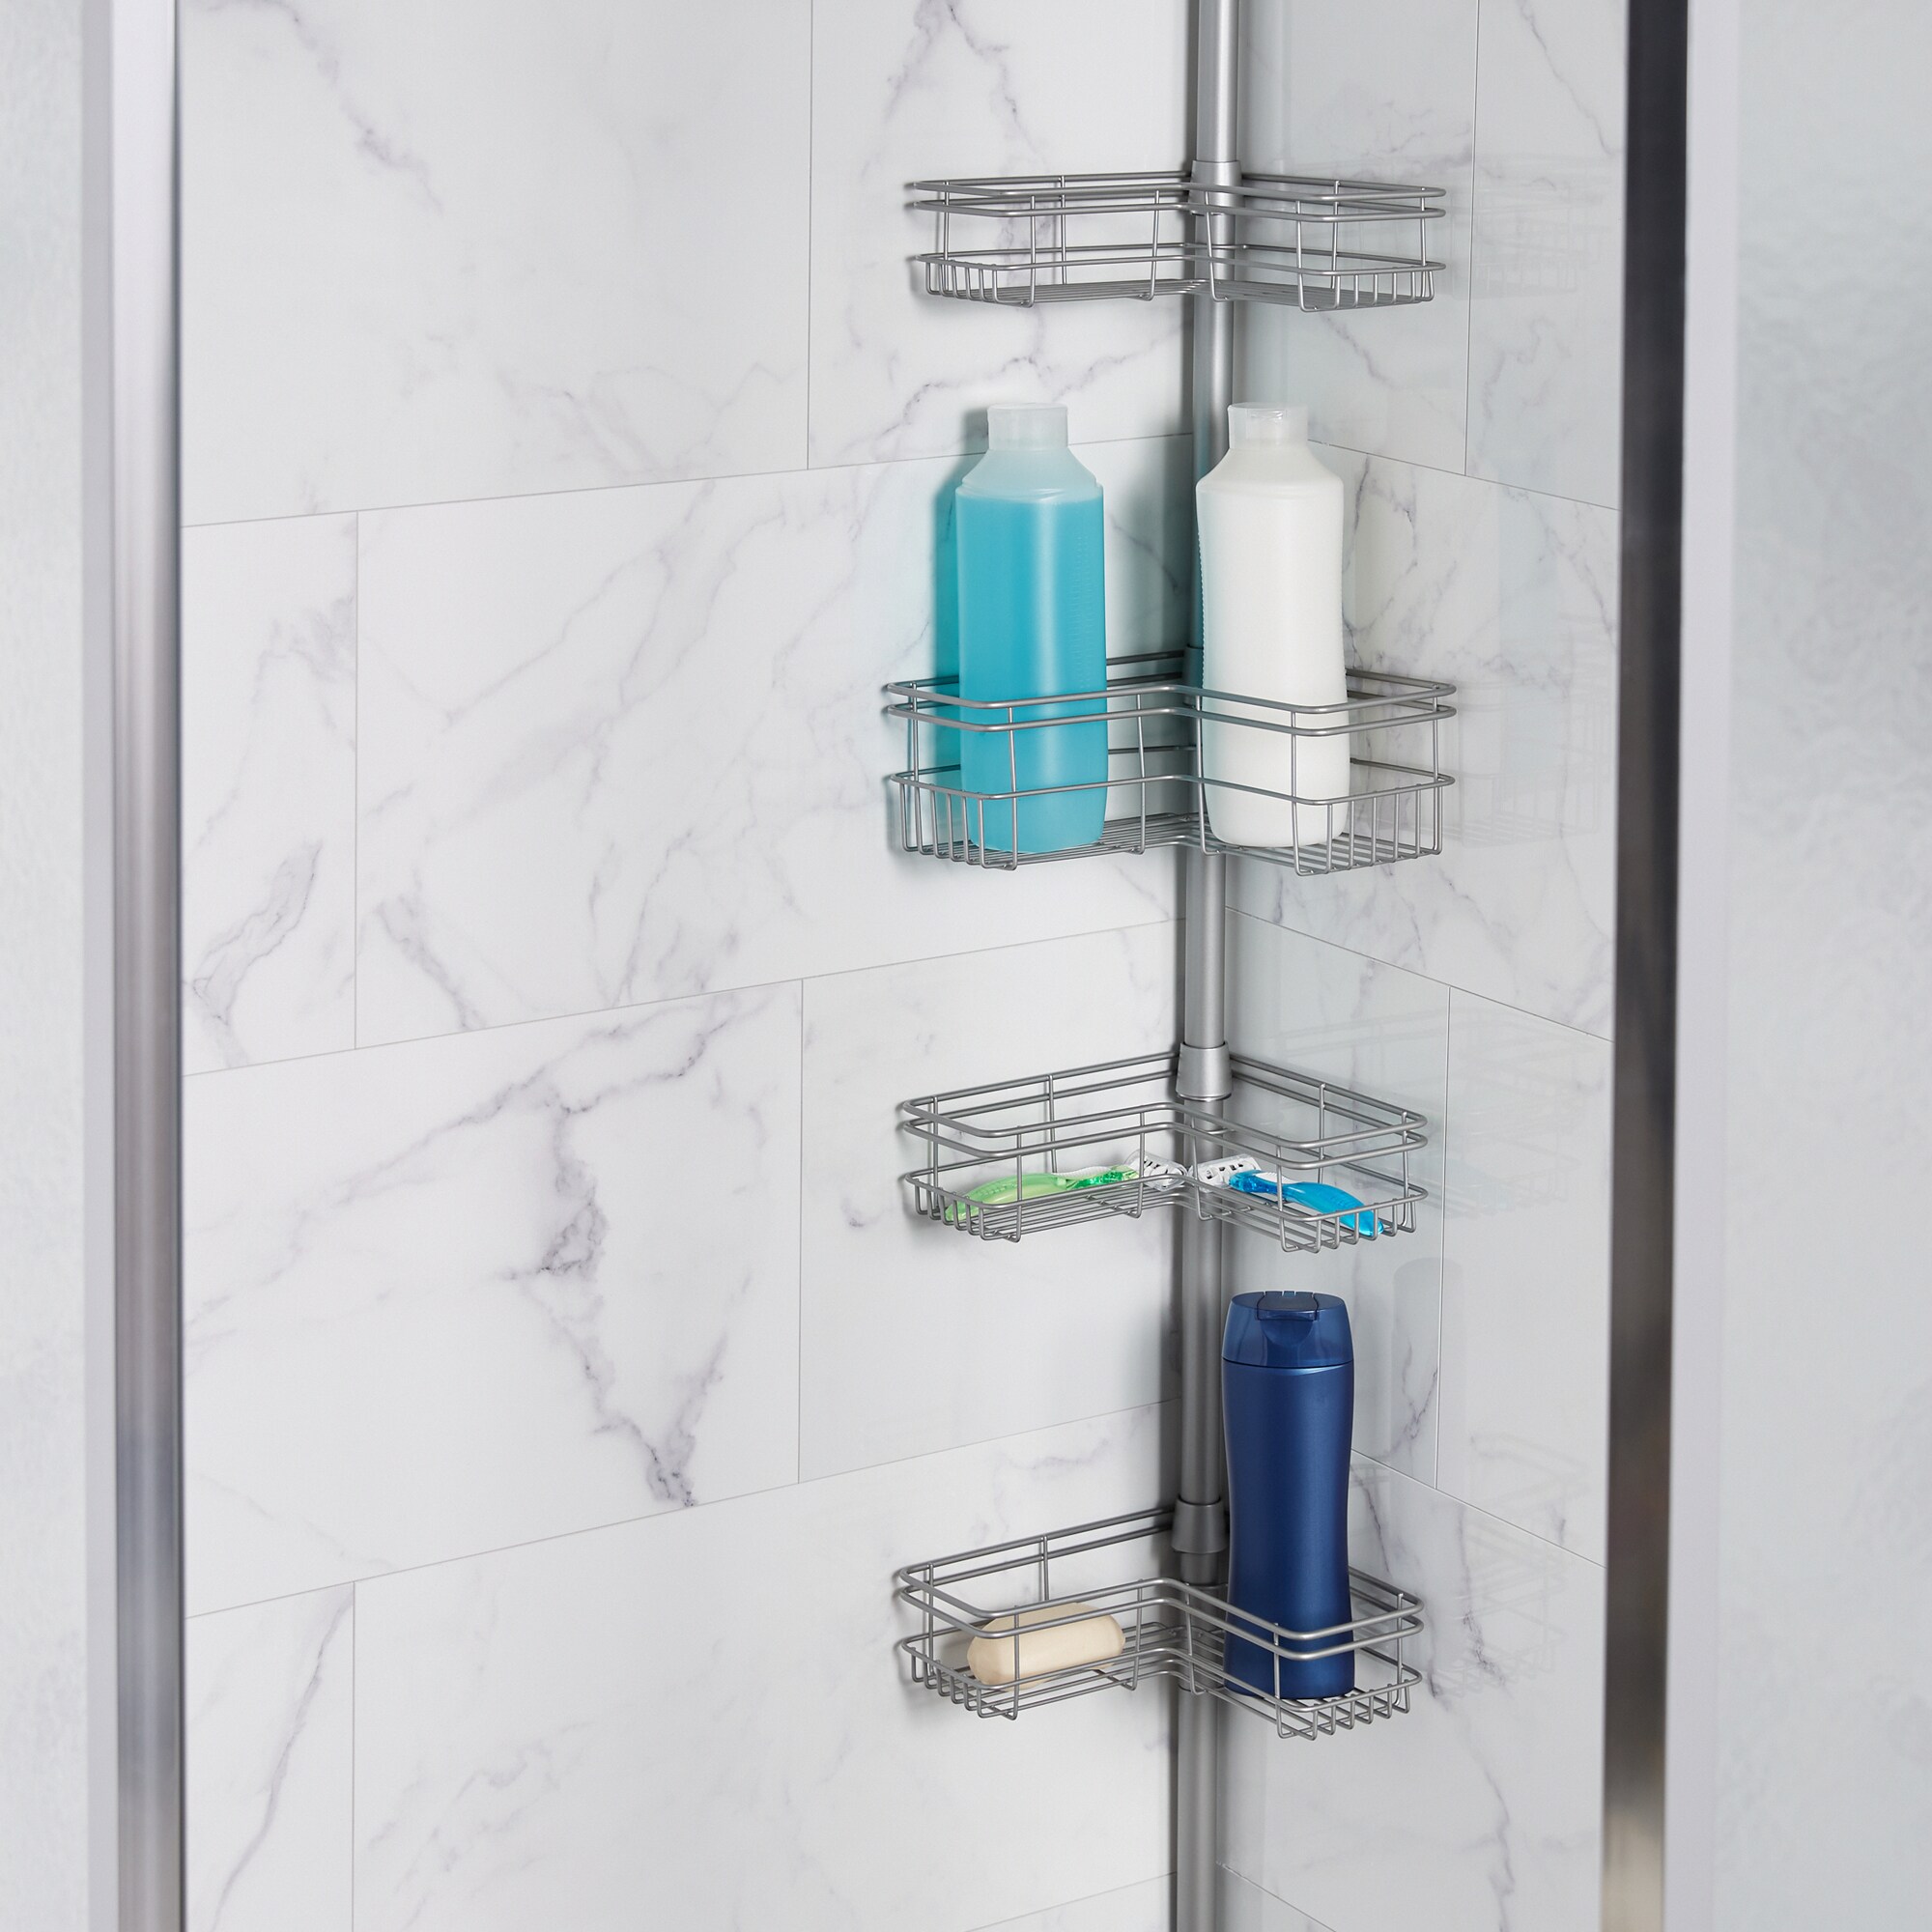 New Zenith Satin Nickel Metal Shower Caddy Pole Bath Cleaning Up To 12x97 Inch 